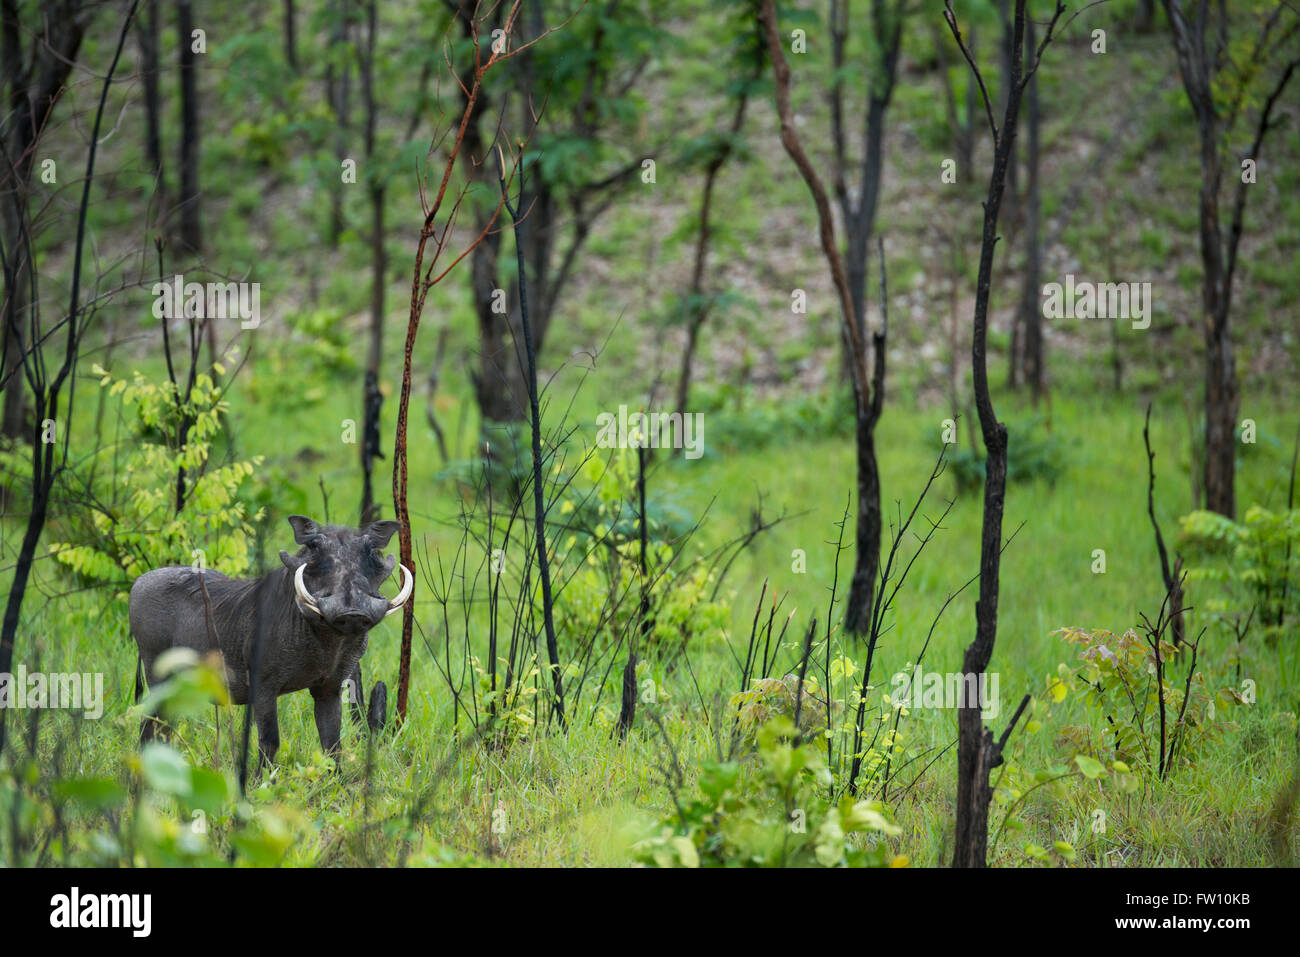 Africa, Zambia, South Luangwa National Park, mountain area between Mfuwe and Bilimungwe. Common warthog in lush green habitat. Stock Photo